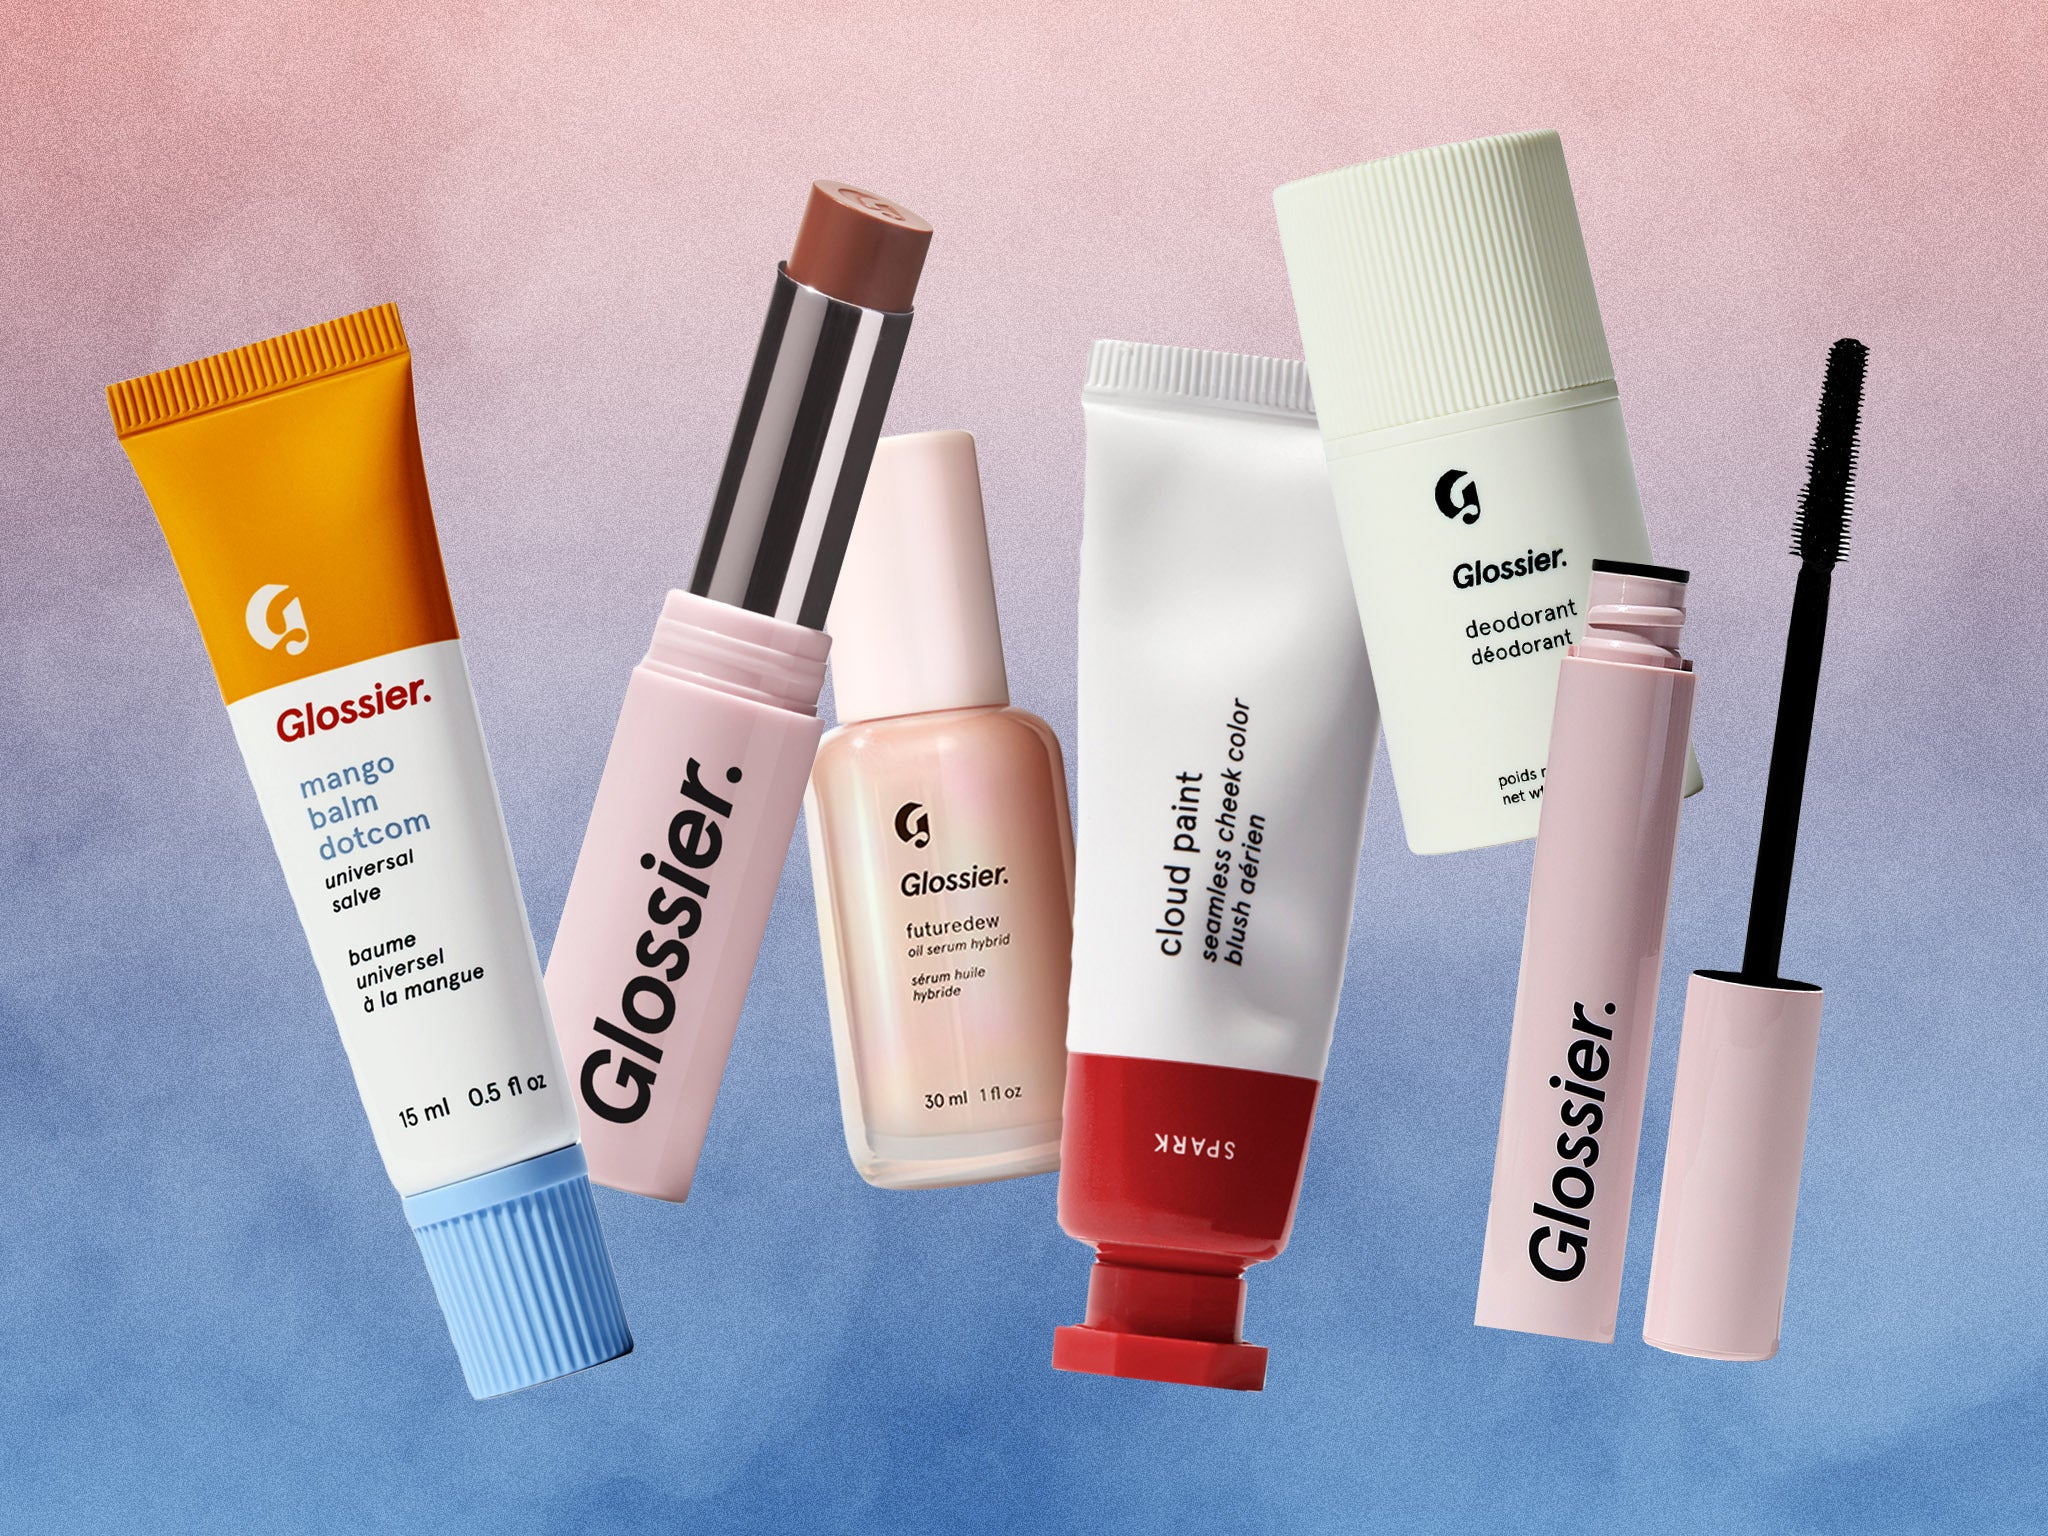 The best Glossier products that are worth the hype, from cult classics to worthy newcomers